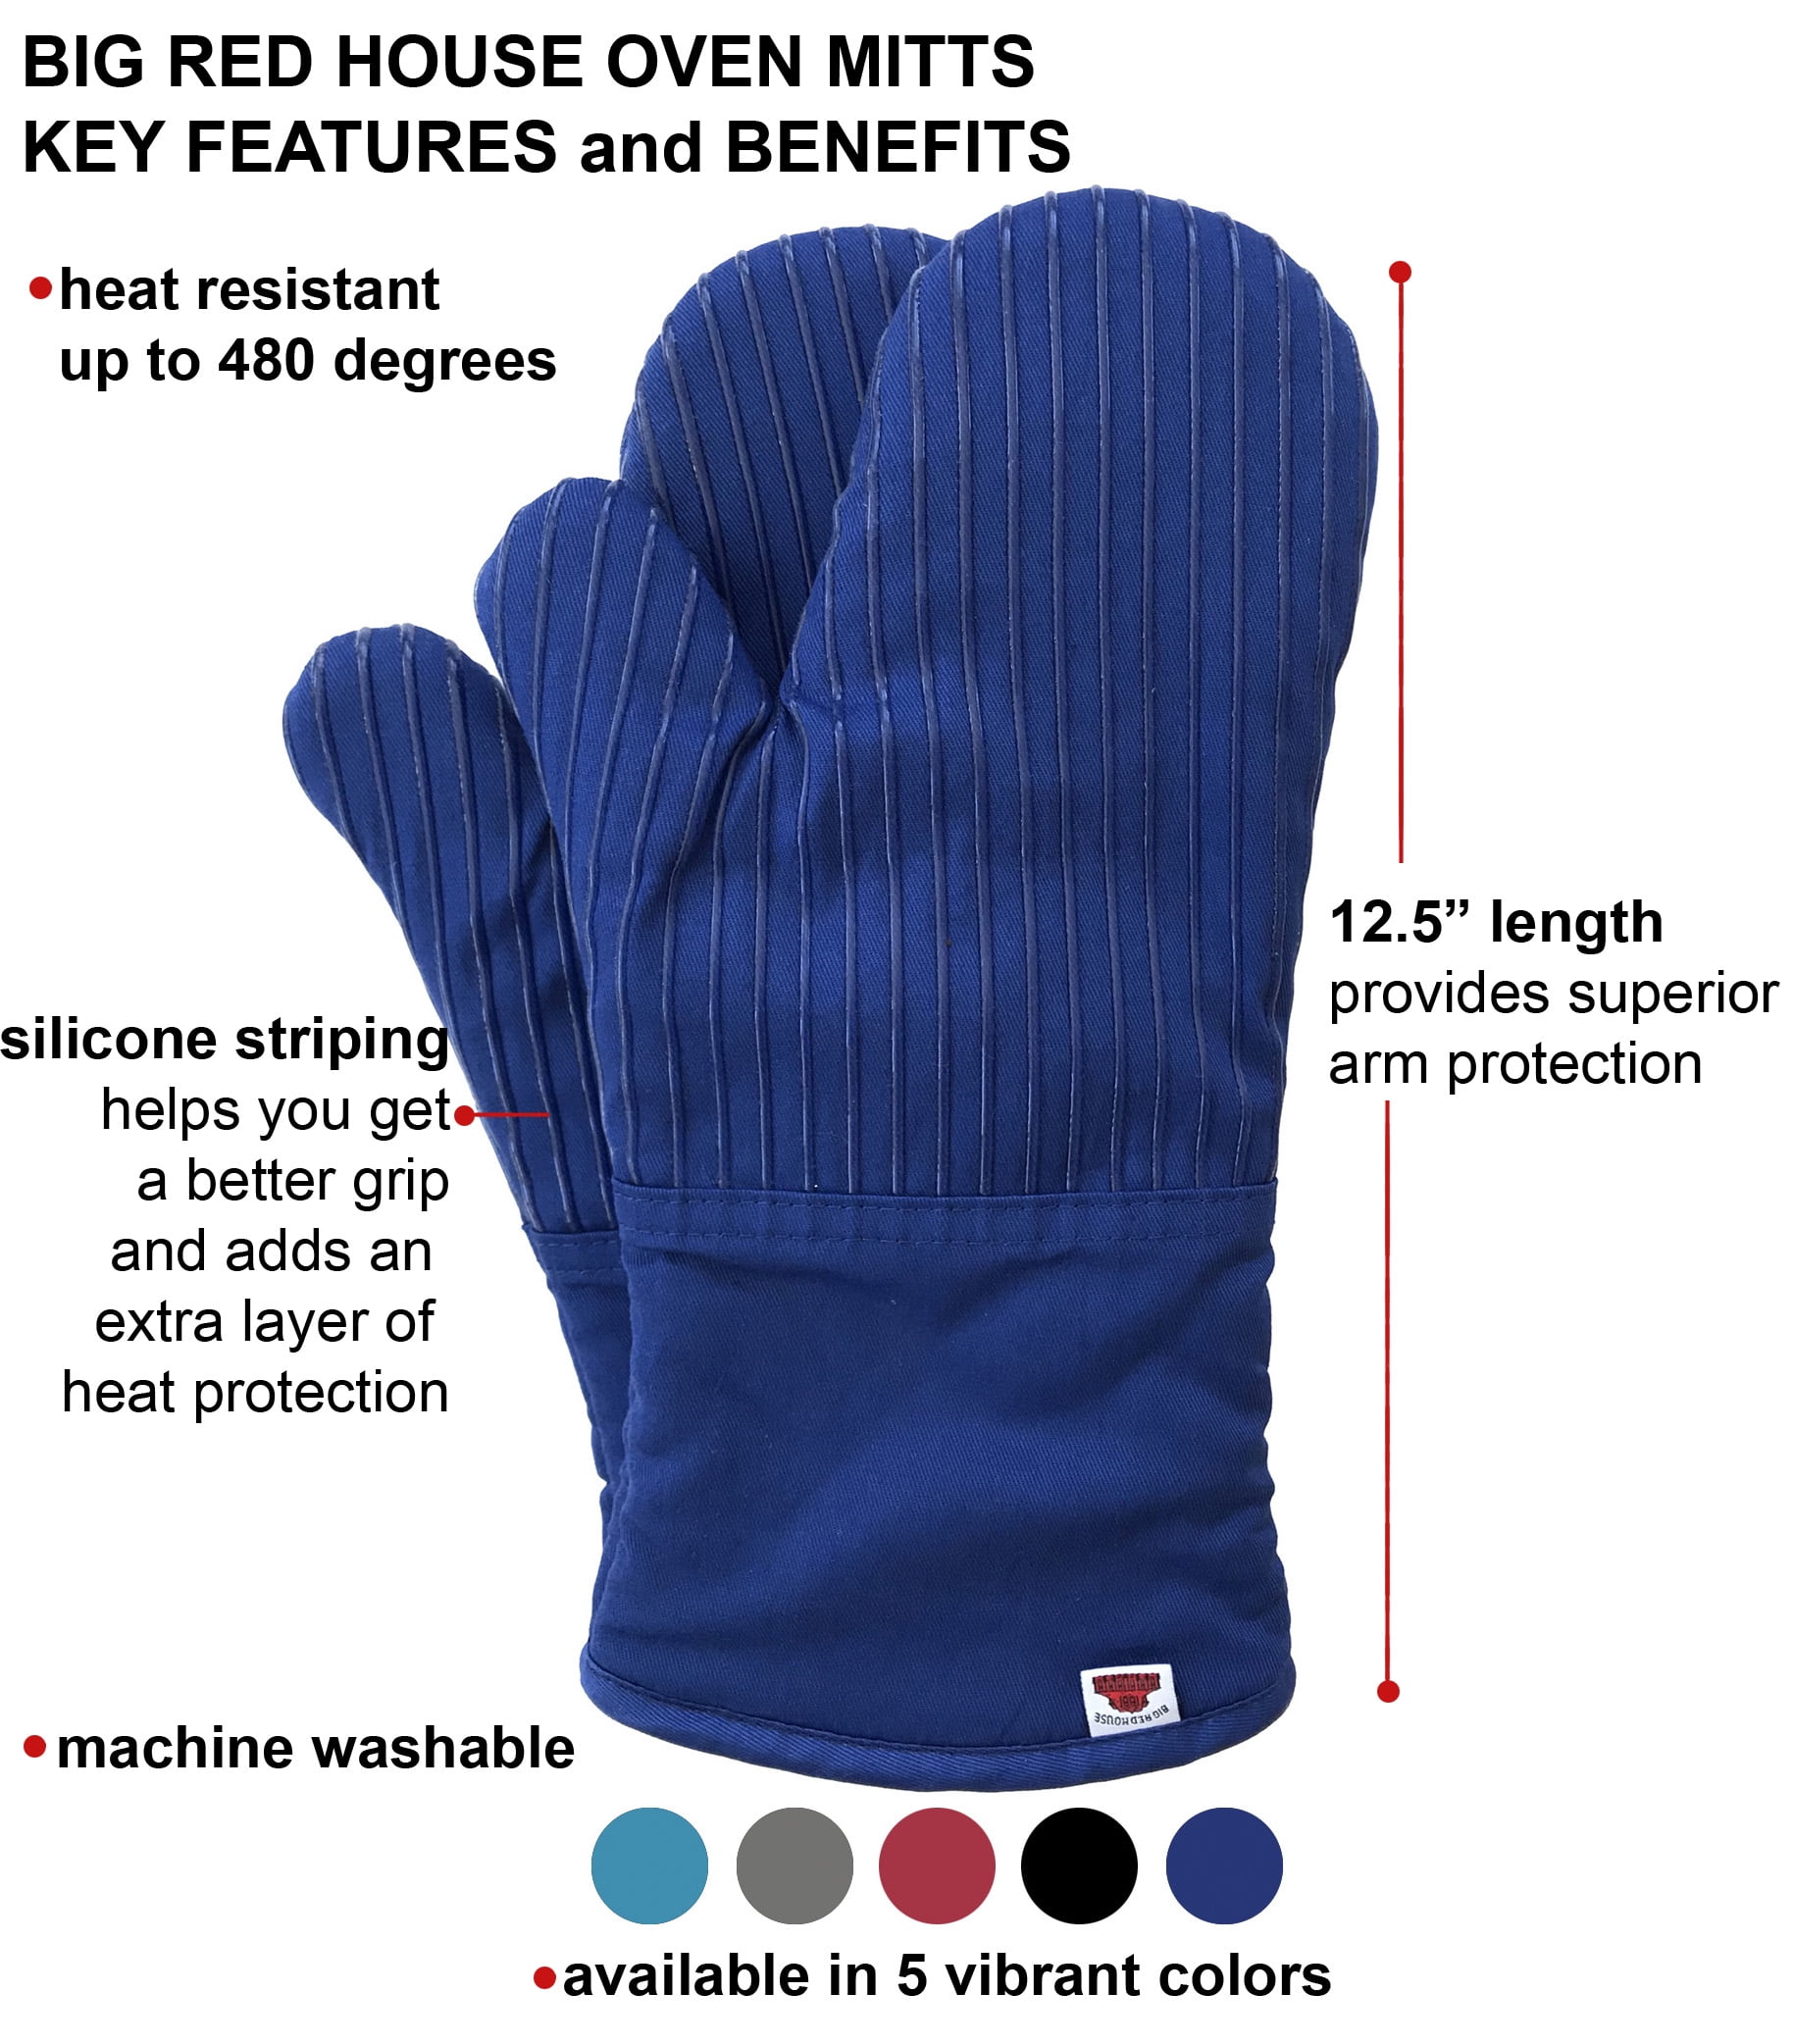 Big Red House Heat-Resistant Oven Mitts - Set of 2 Silicone Kitchen Oven  Mitt Gloves, Dark Royal Blue 